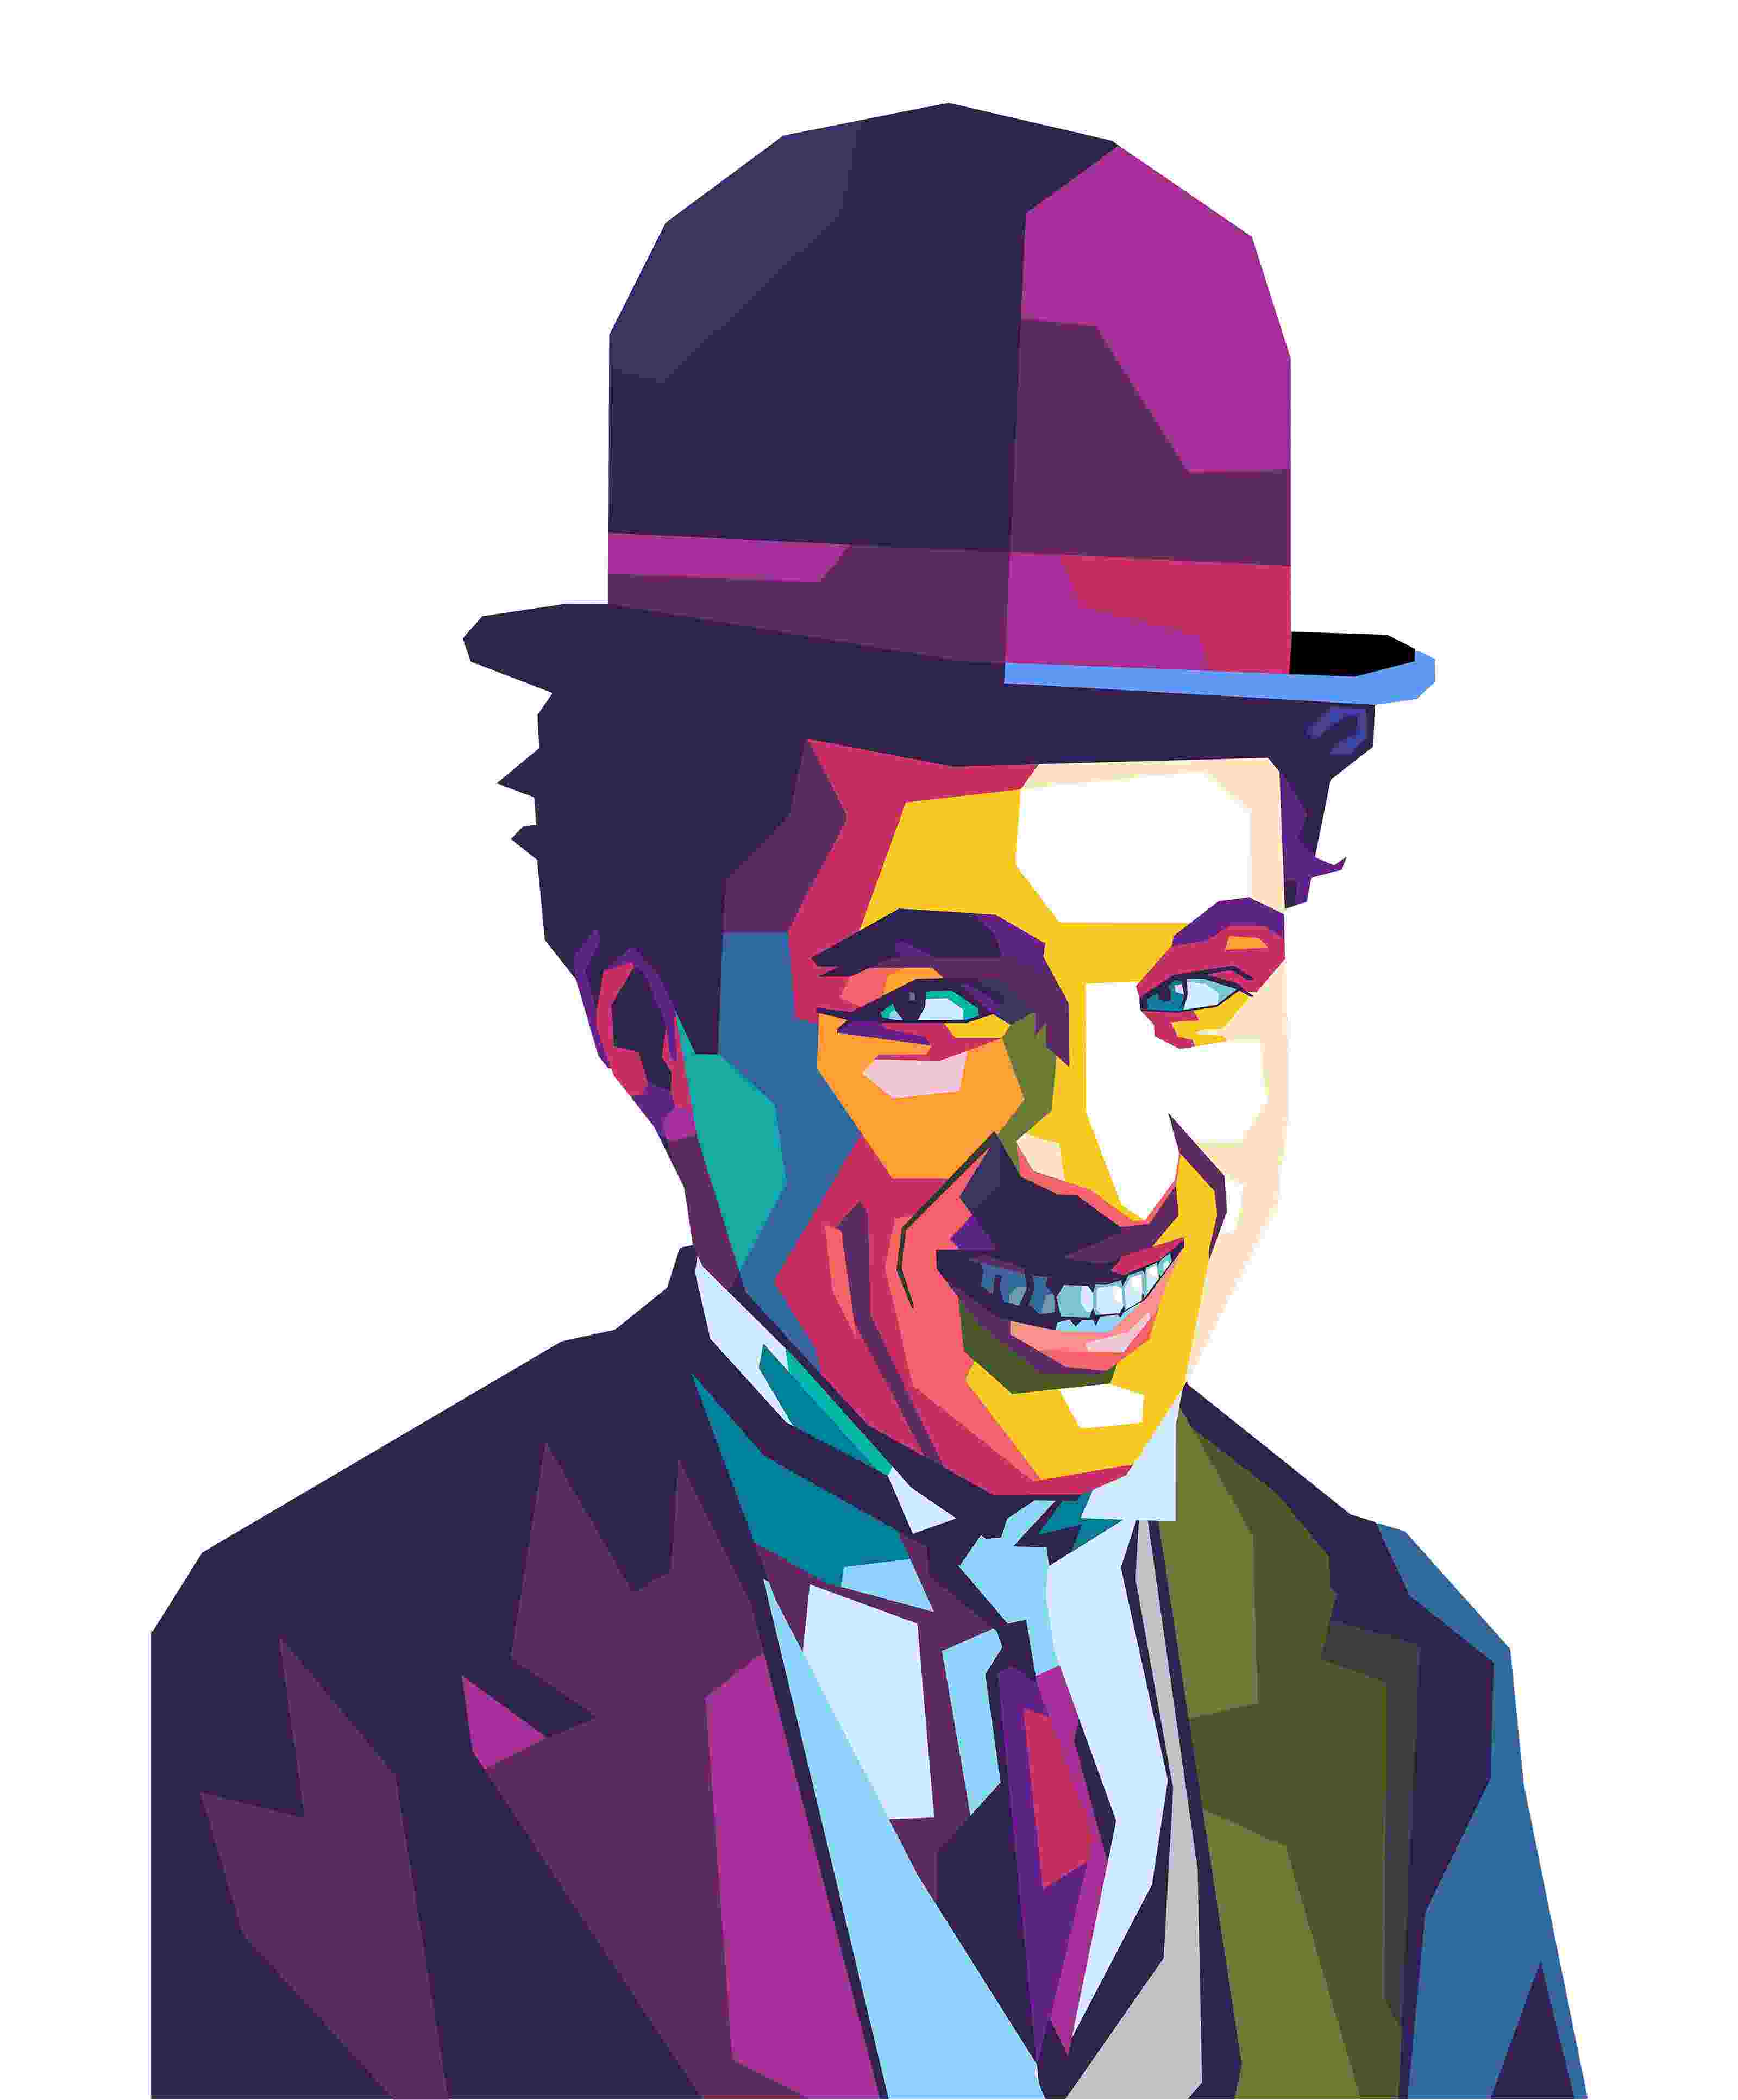 Animal Jigsaw Puzzle > Wooden Jigsaw Puzzle > Jigsaw Puzzle A4 Wooden Box Charlie Chaplin - Jigsaw Puzzle